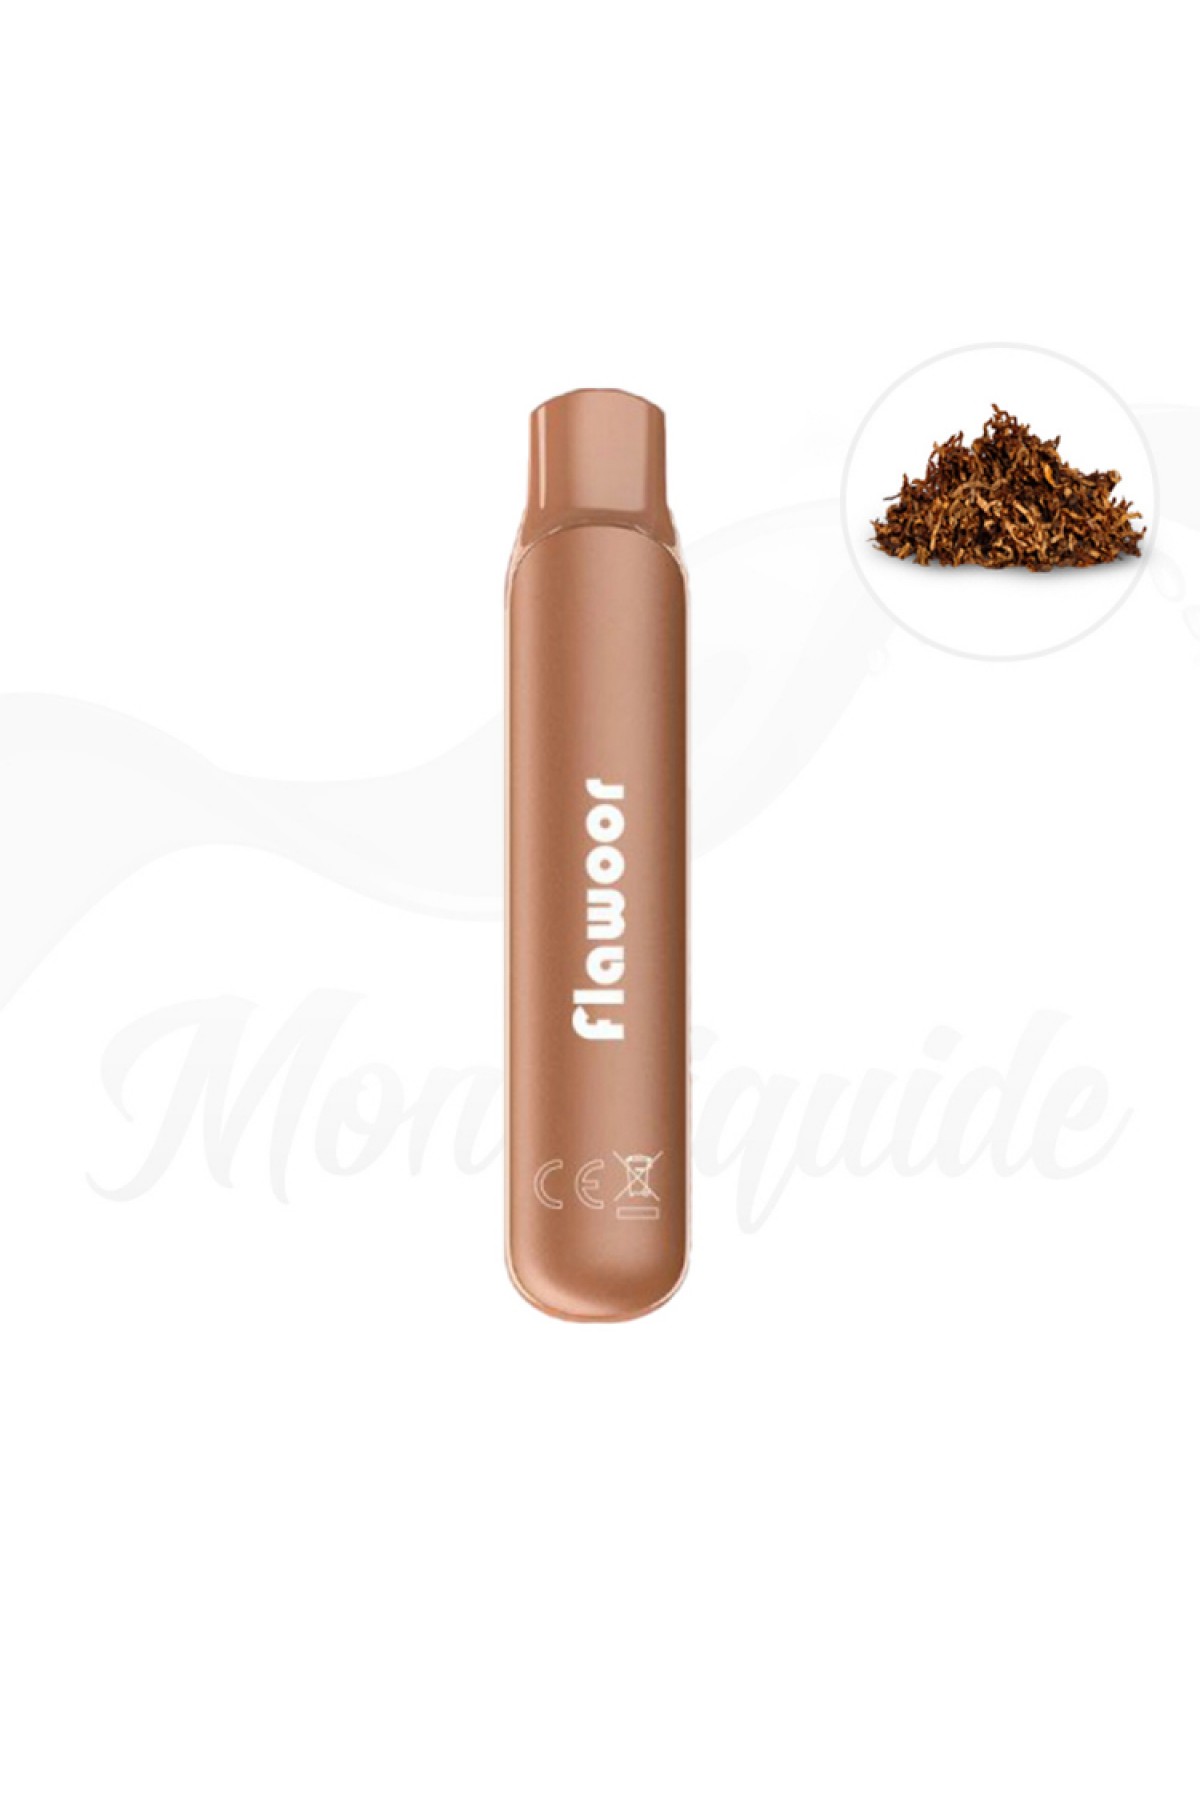 Flawoor Mate - Golden Classic 600 Puff Kit